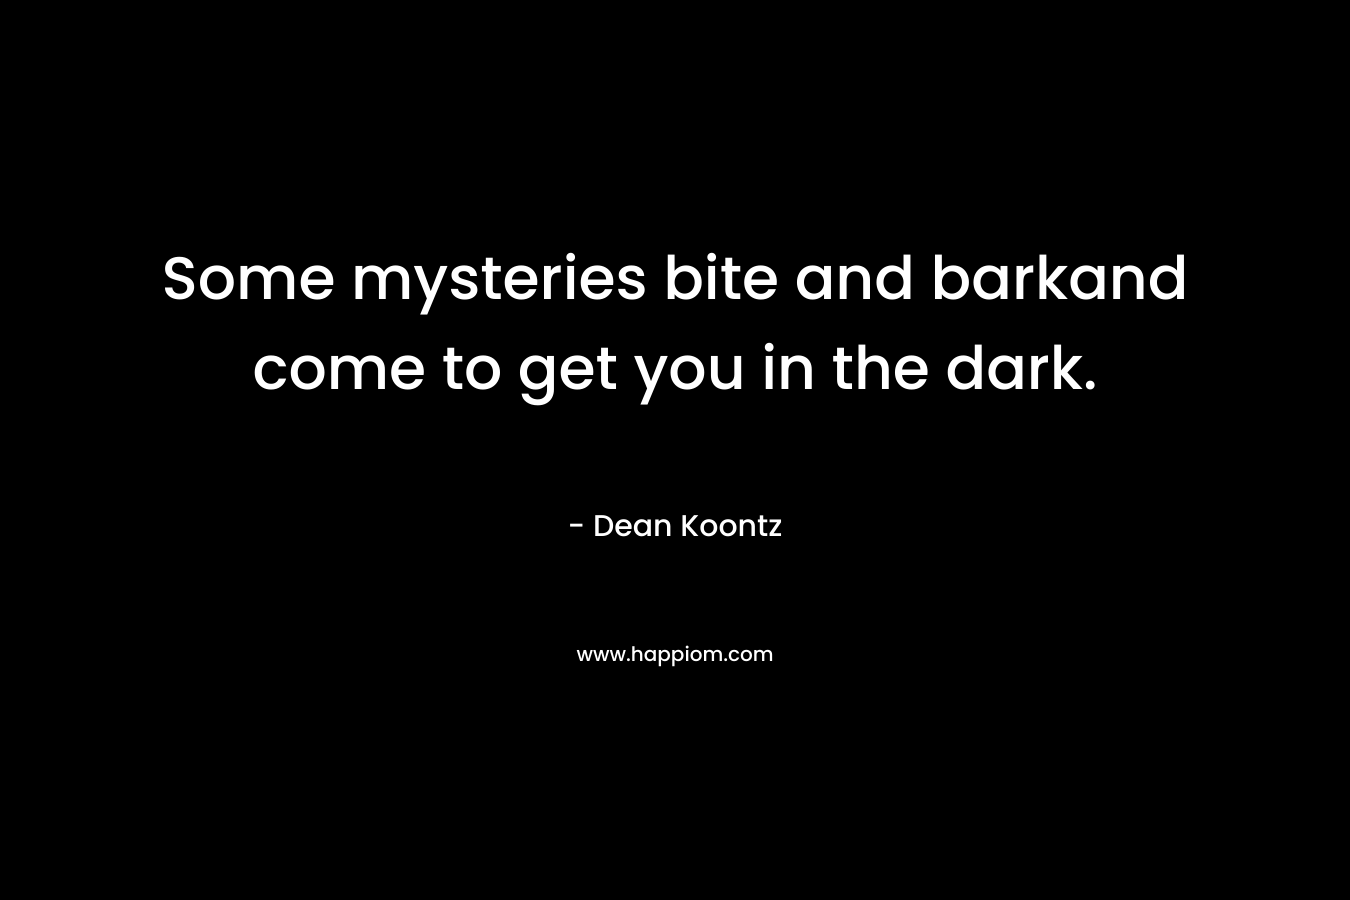 Some mysteries bite and barkand come to get you in the dark. – Dean Koontz